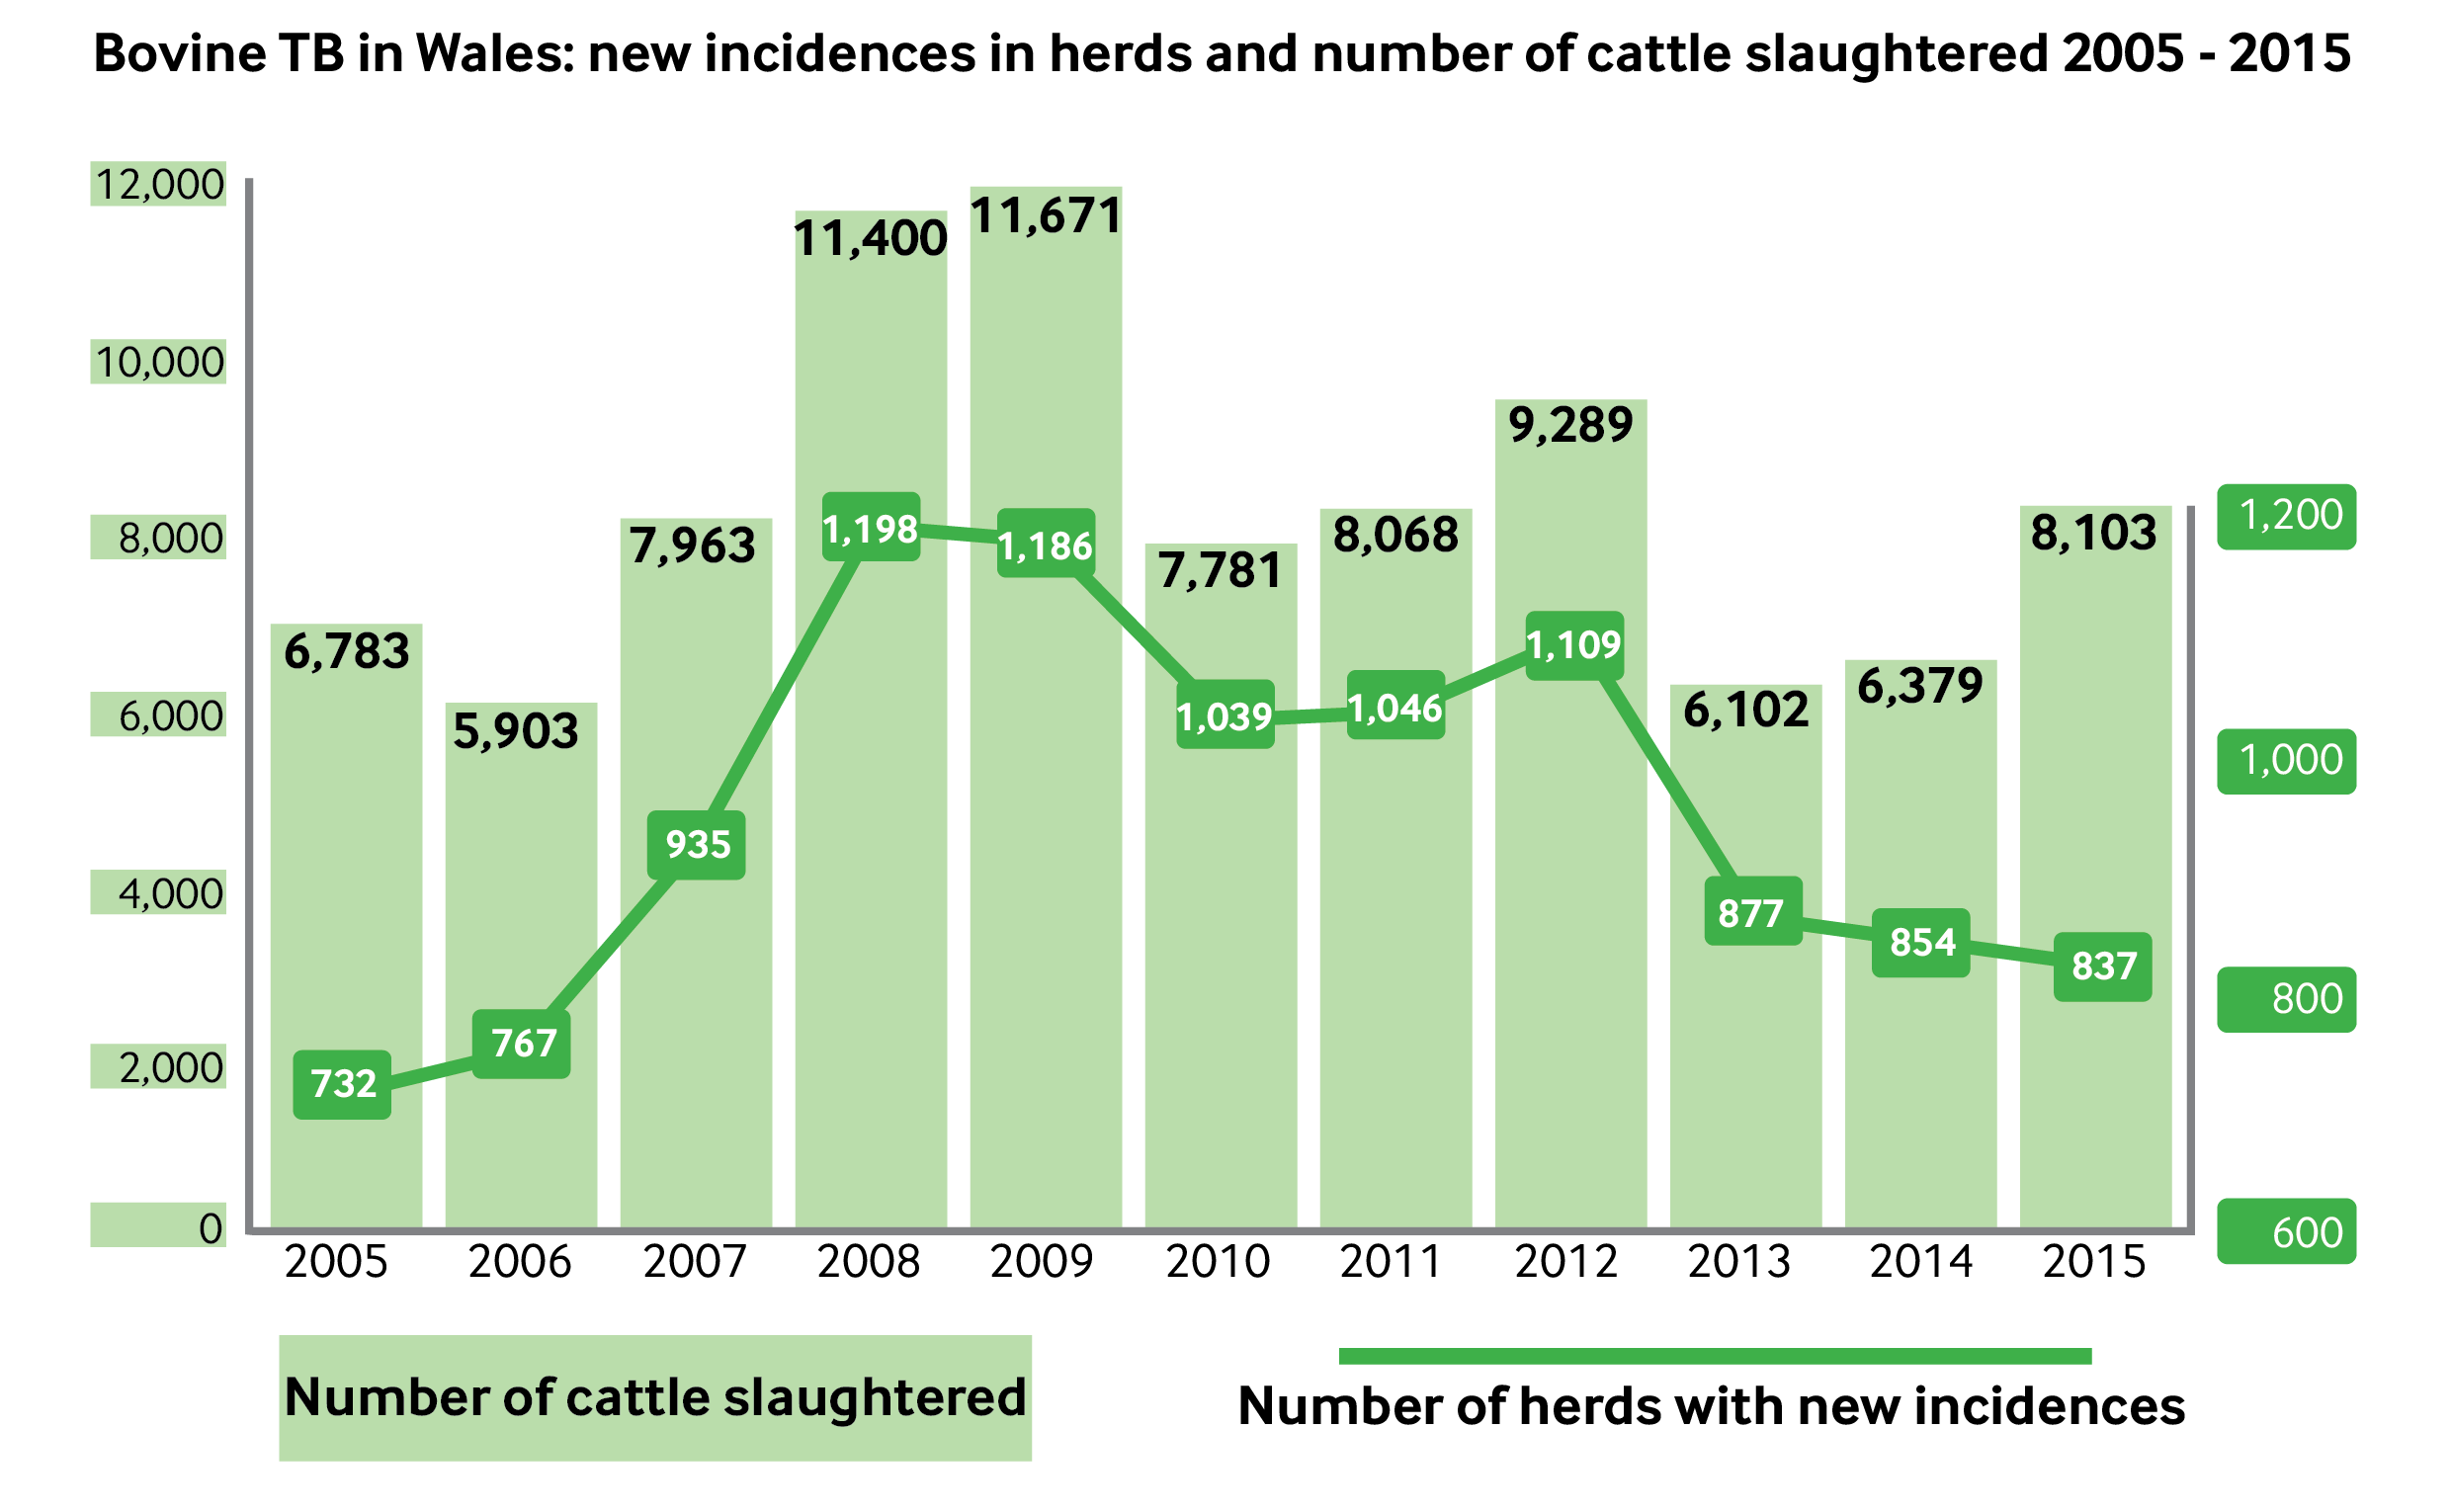 Line chart showing number of new herd incidences overlying bar chart showing number of cattle slaughtered.